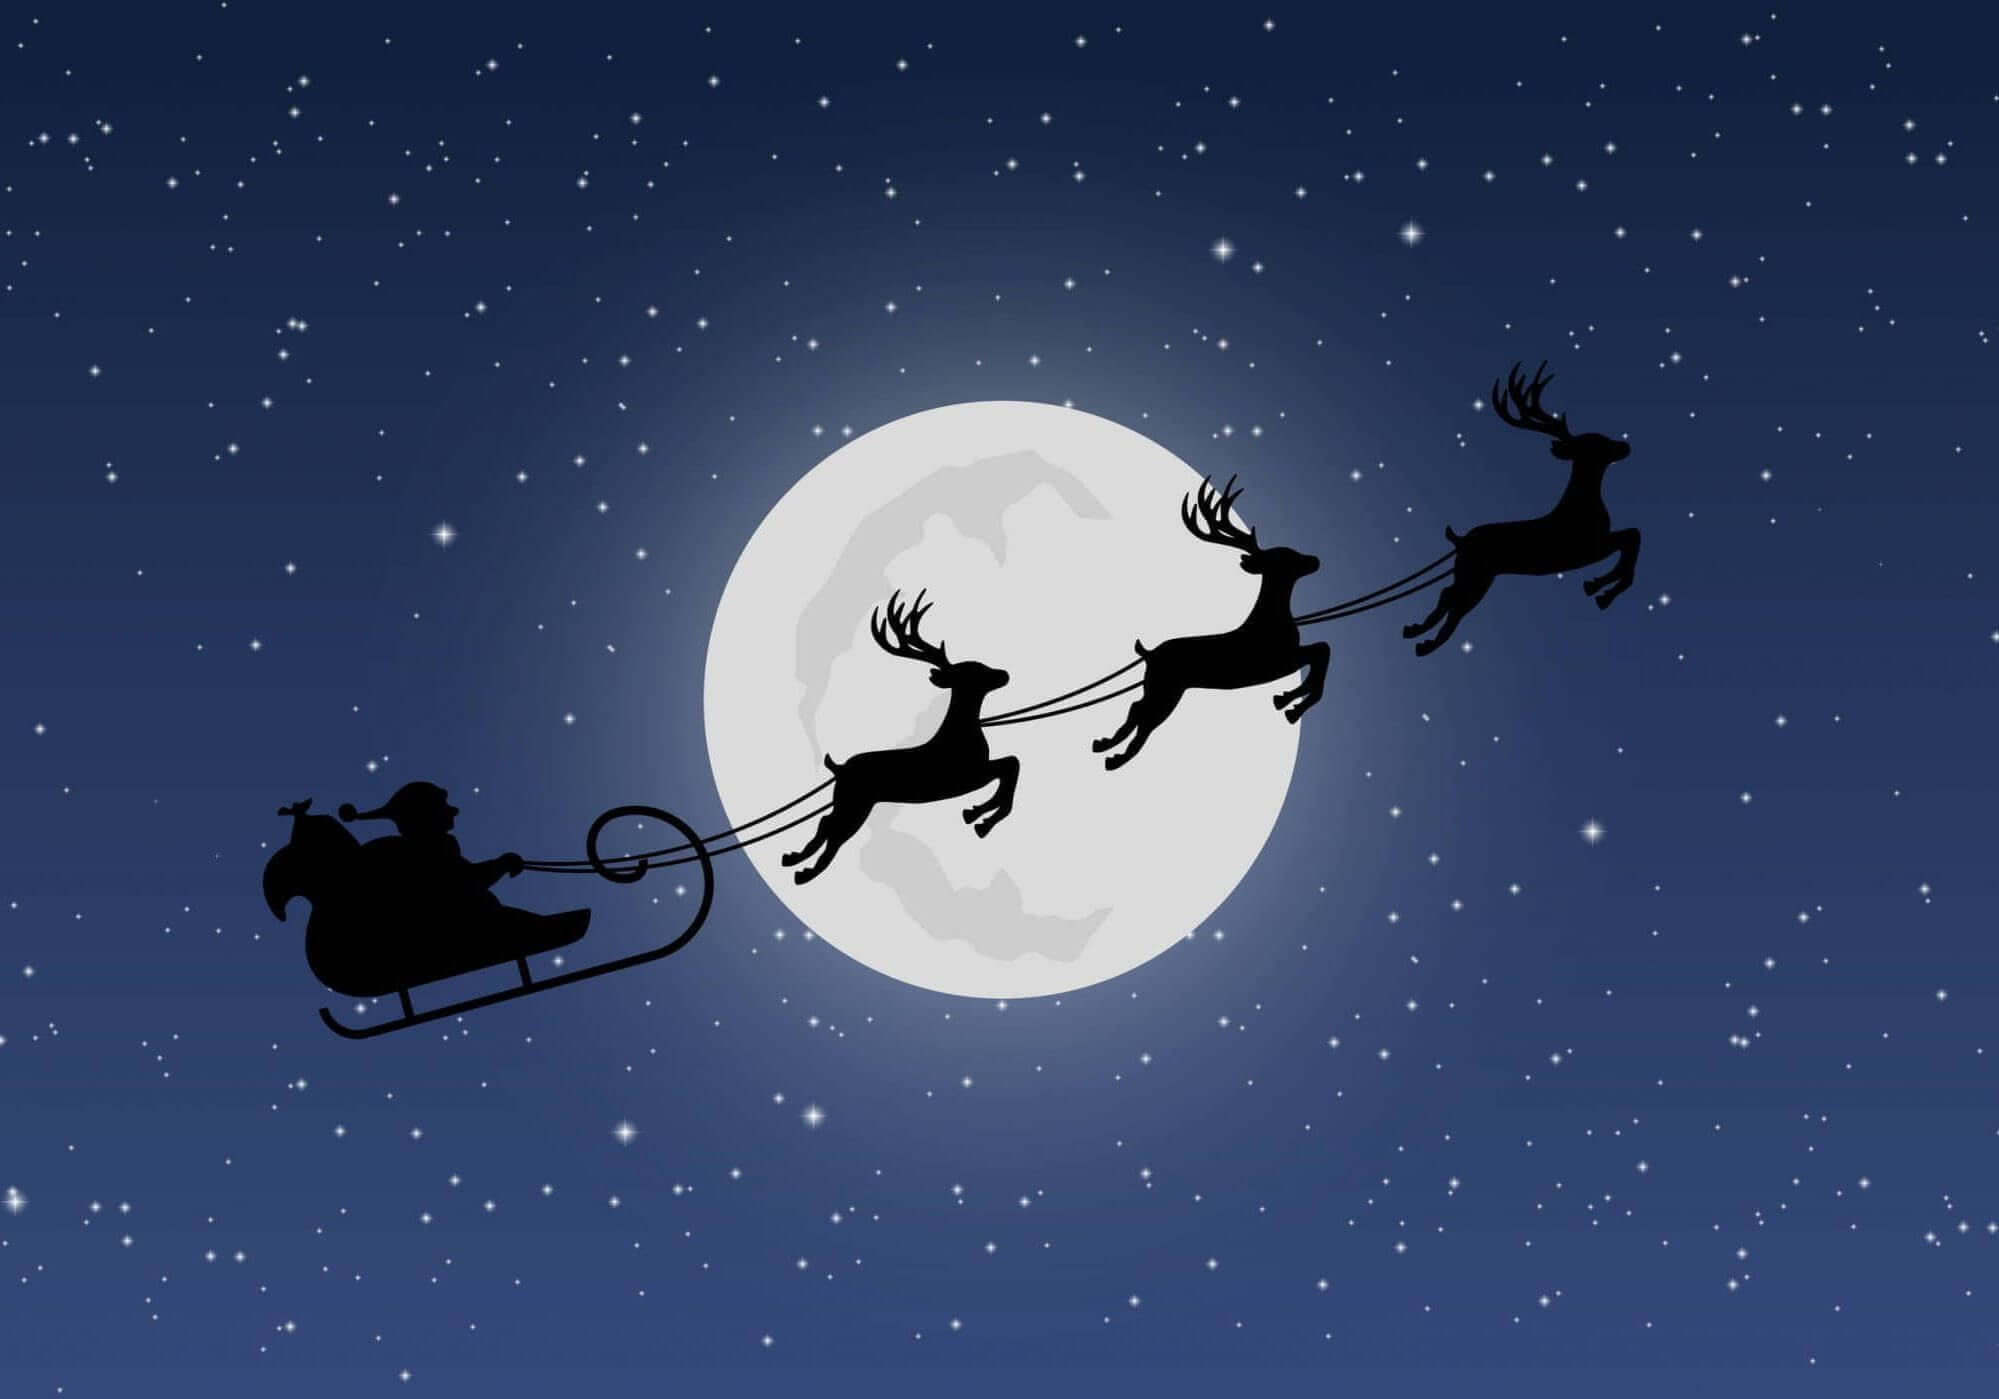 Santa's sleigh with reindeers on background of night sky with stars and moon